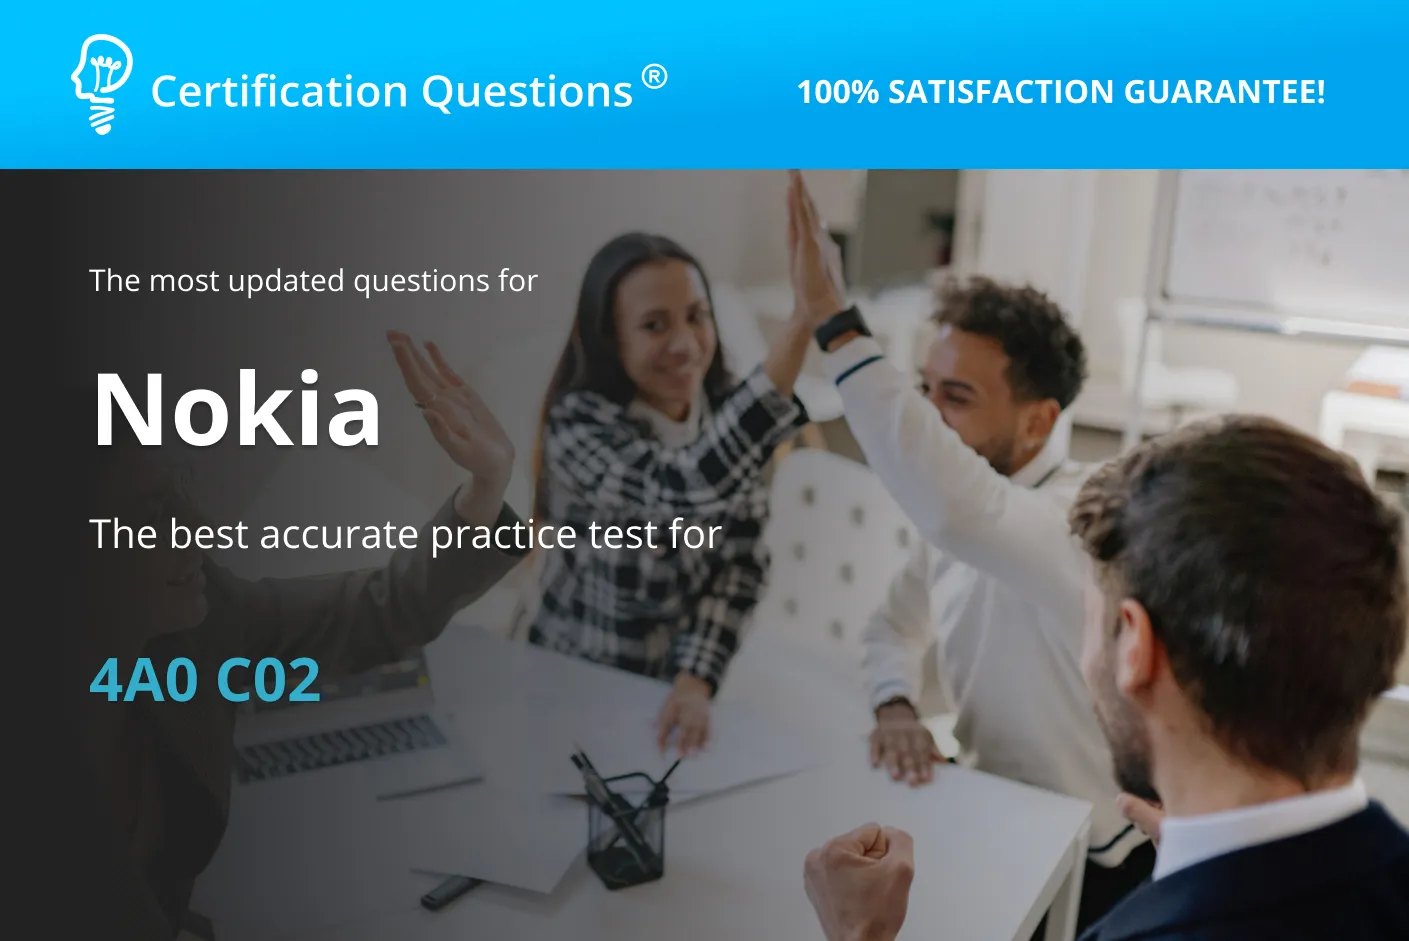 This image represents the guide about Nokia SRA Composite Practice Test